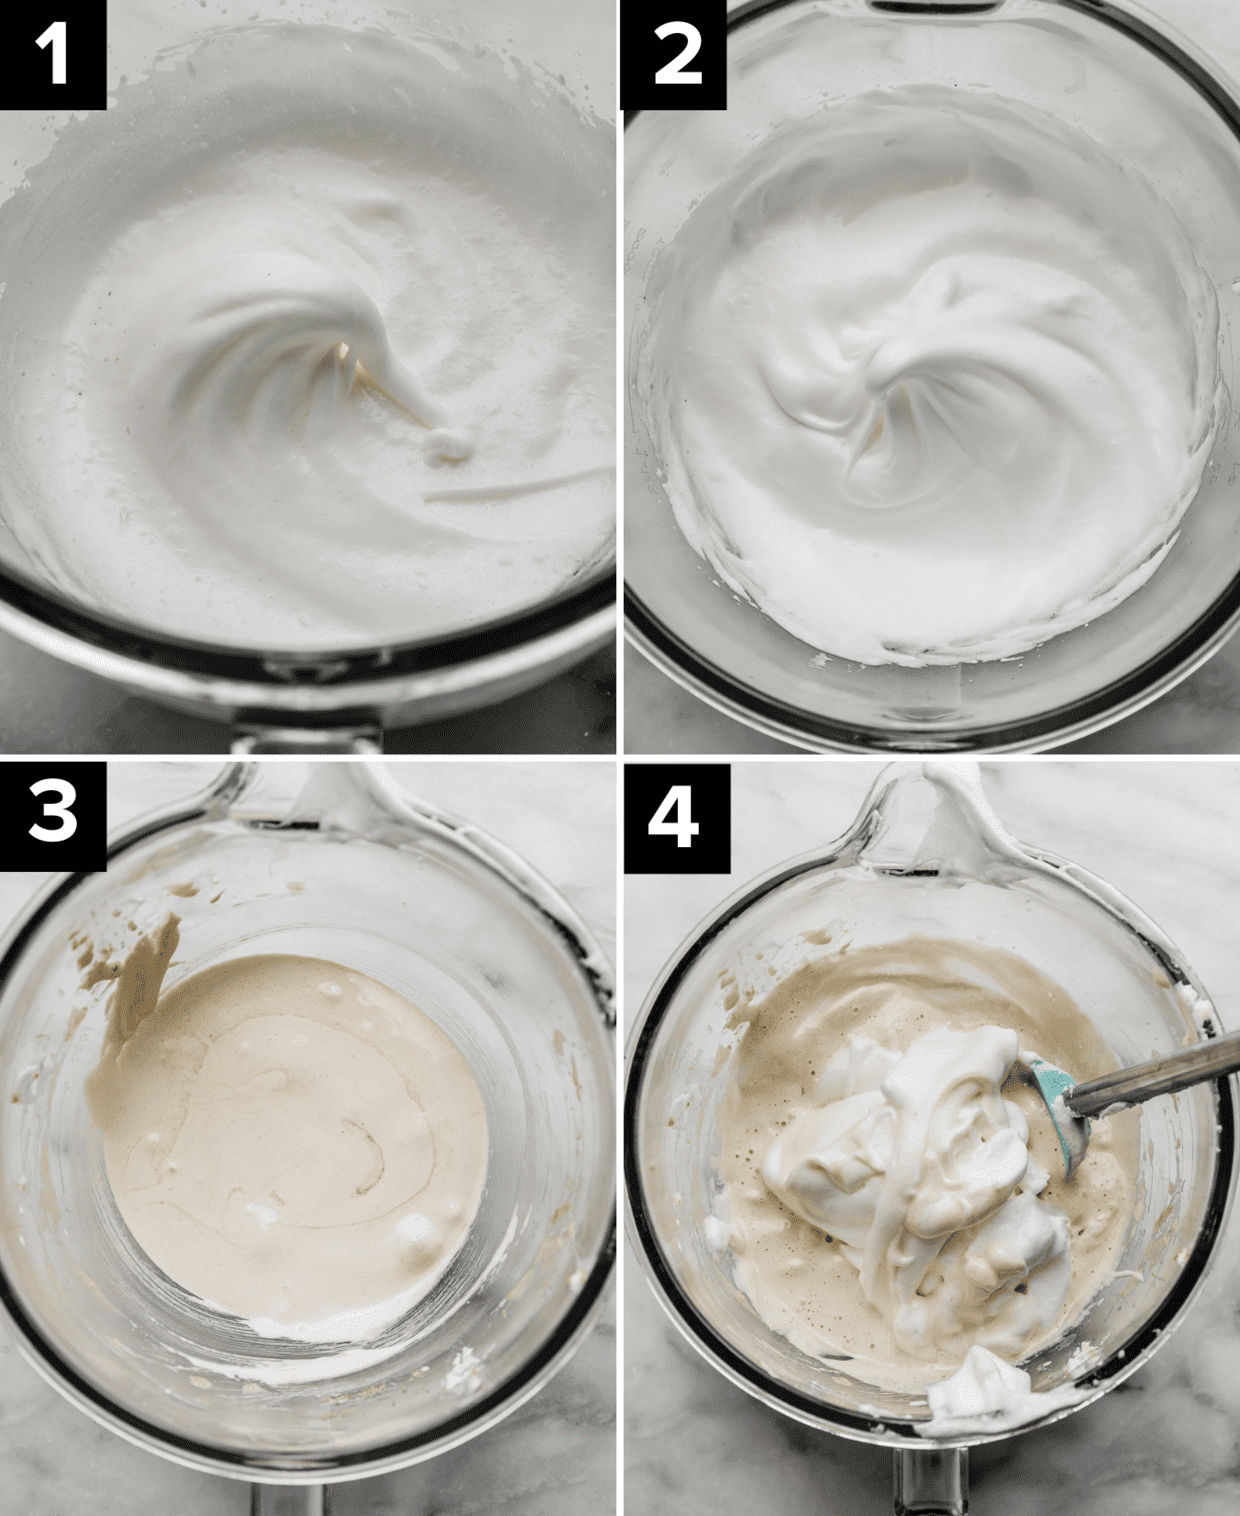 Four images each with a glass stand mixer with whipped egg whites then continuation of wet ingredients added to the bowl in each photo.